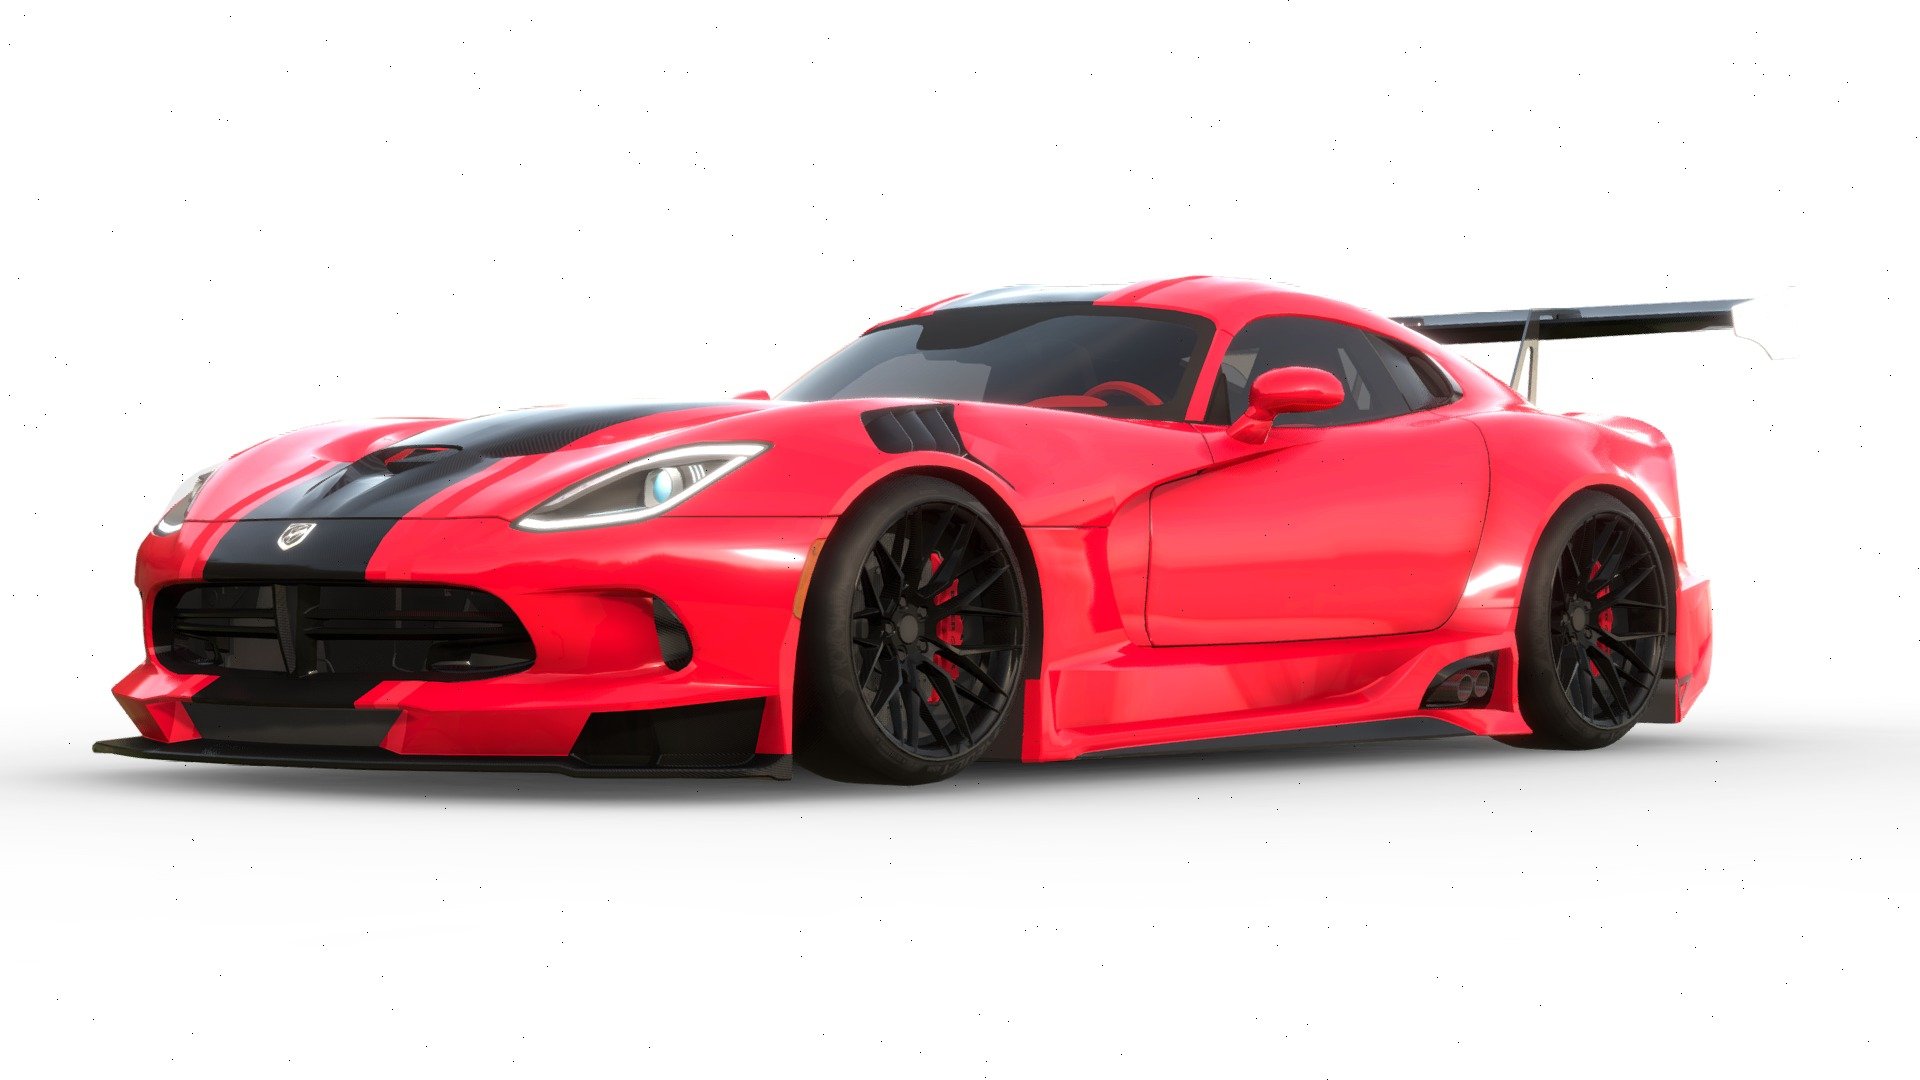 Could you please consider liking and subscribing to my account. Your support would mean a lot to me. Thank you! - Supercar Viper Adrenaline Red edition - Buy Royalty Free 3D model by zizian 3d model